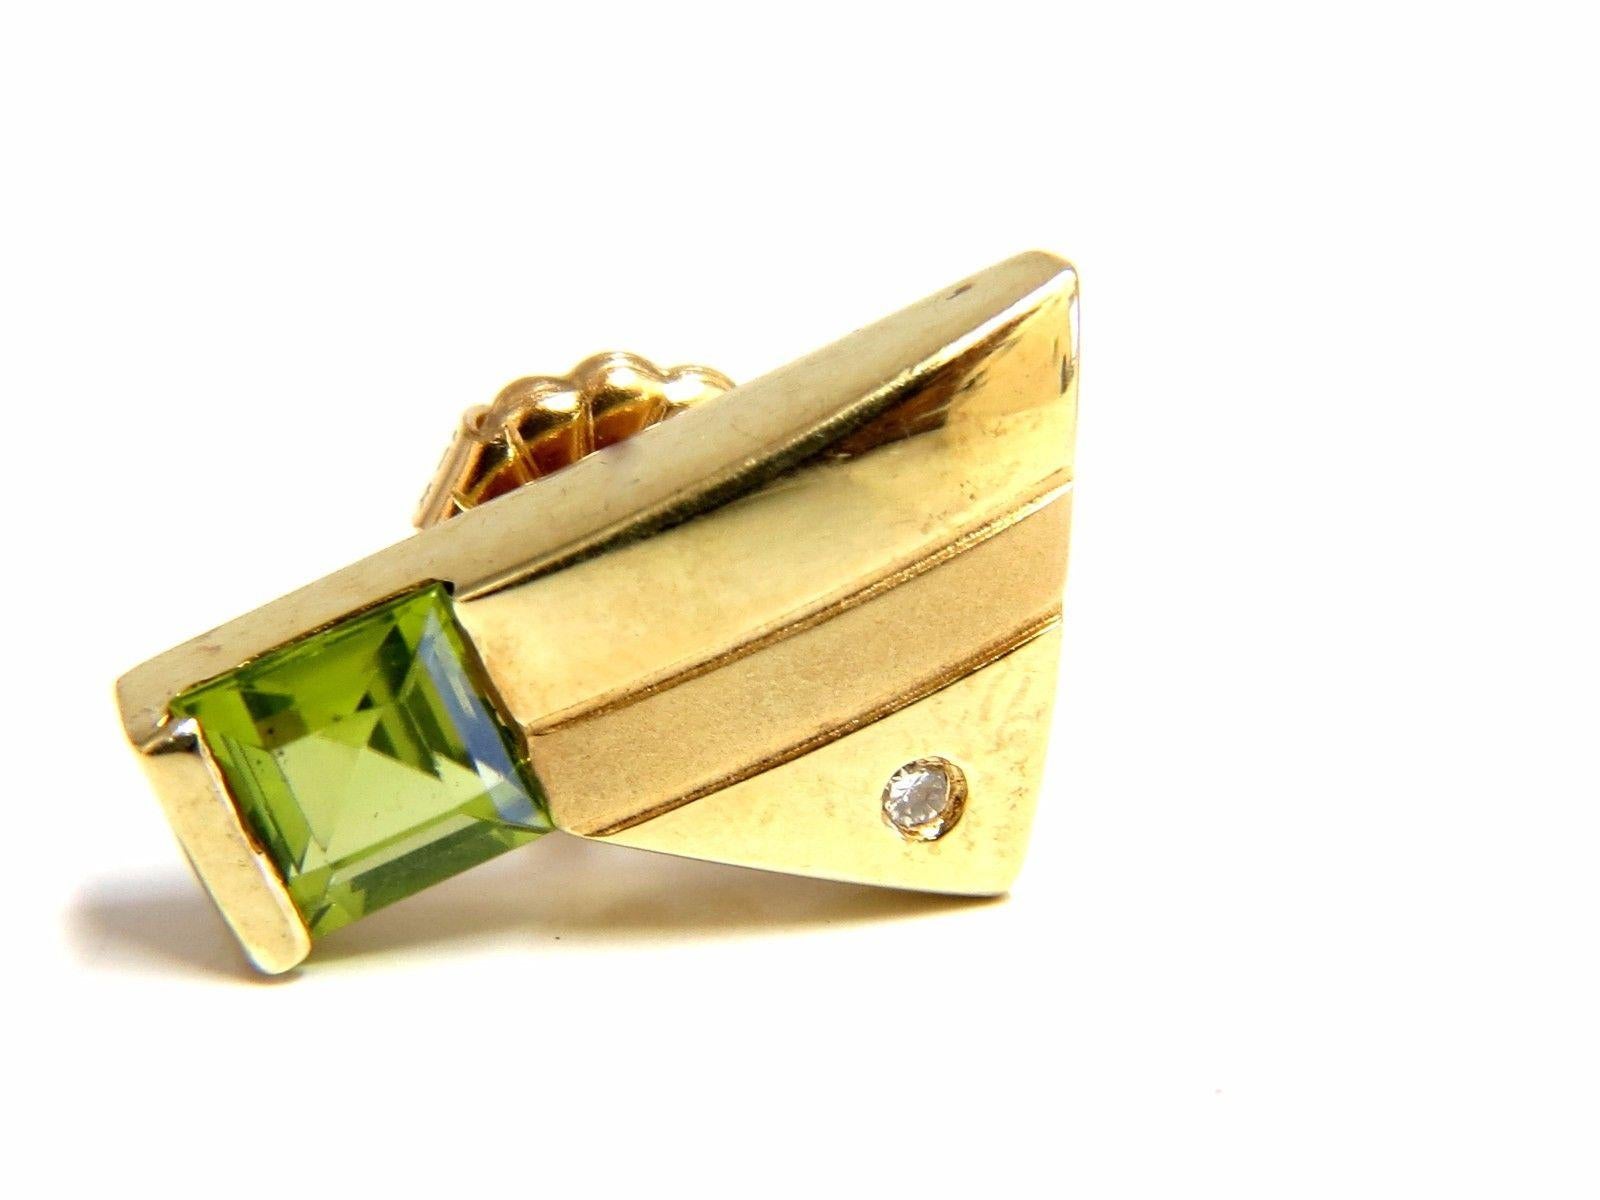 Modern Deco:

Gorgeous brilliance,

1.00ct. Natural Bright Green Peridot

Fully Faceted for maximum brilliance

Clean Clarity and transparent

Asscher cuts

5 X 4mm each.



.04ct. diamonds,

Rounds and full cuts.

Flush / Bezel set

14kt. yellow